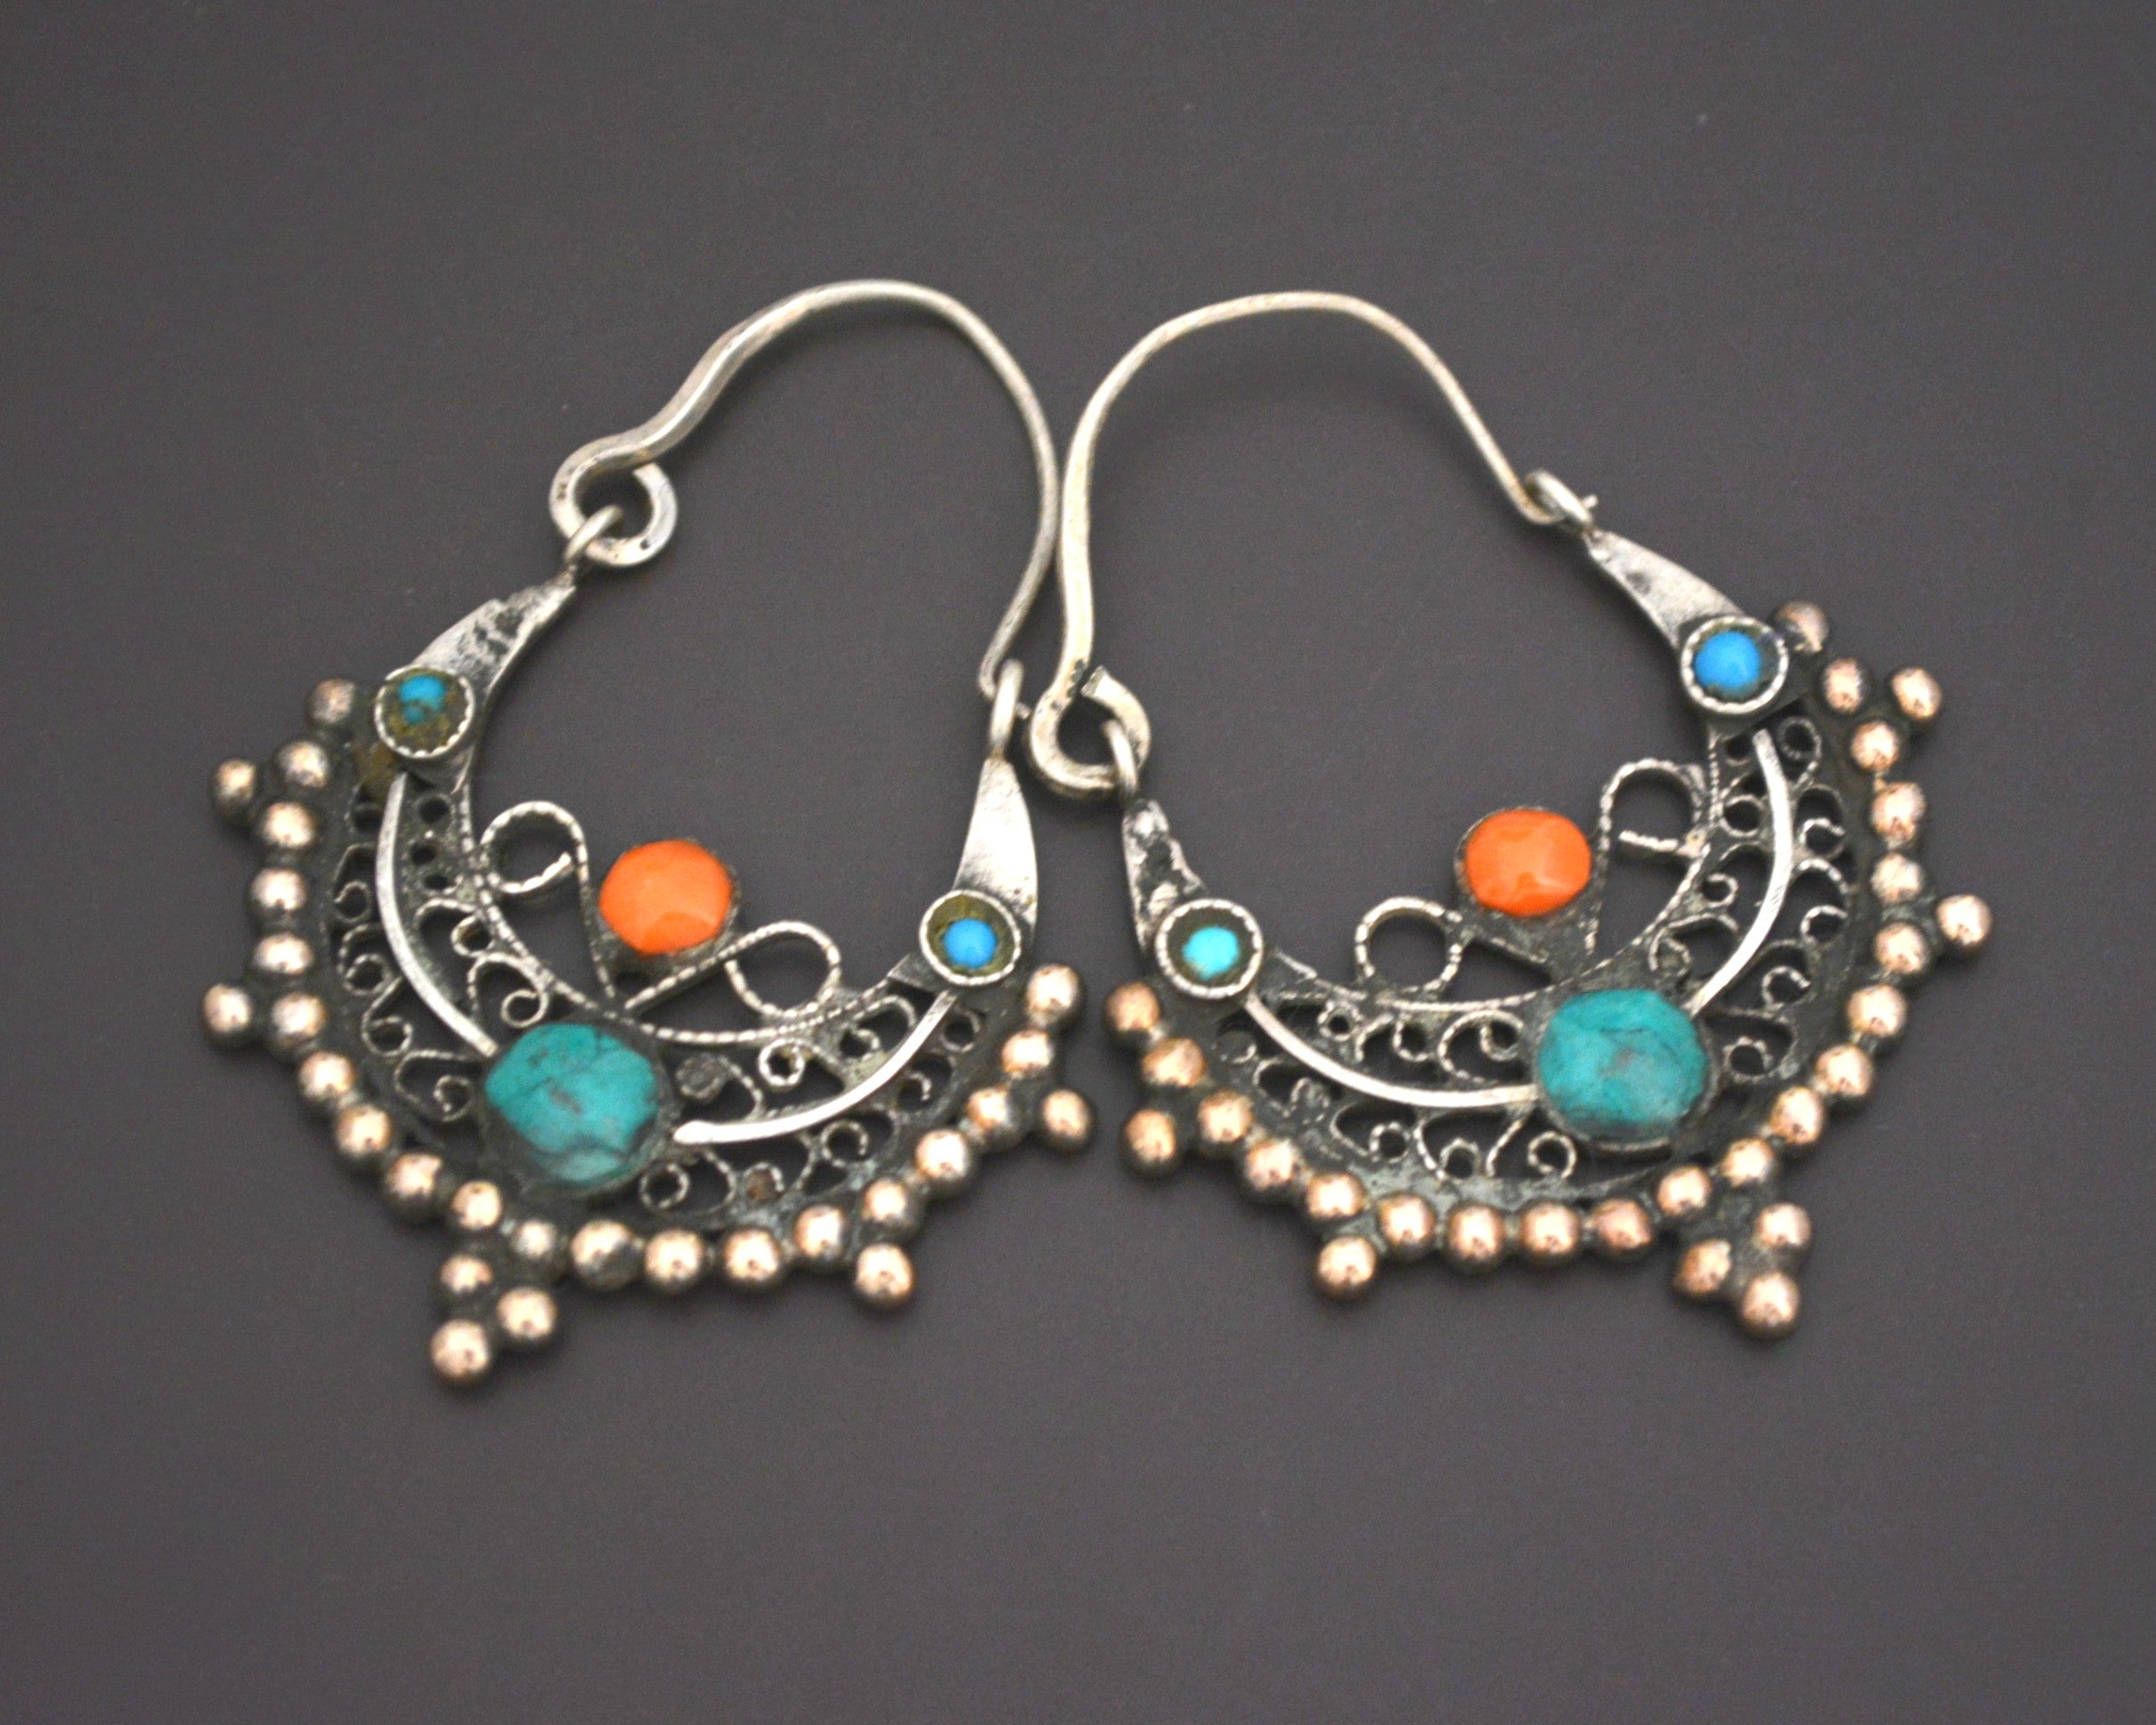 Afghani Hoop Earrings with Turquoise and Coral